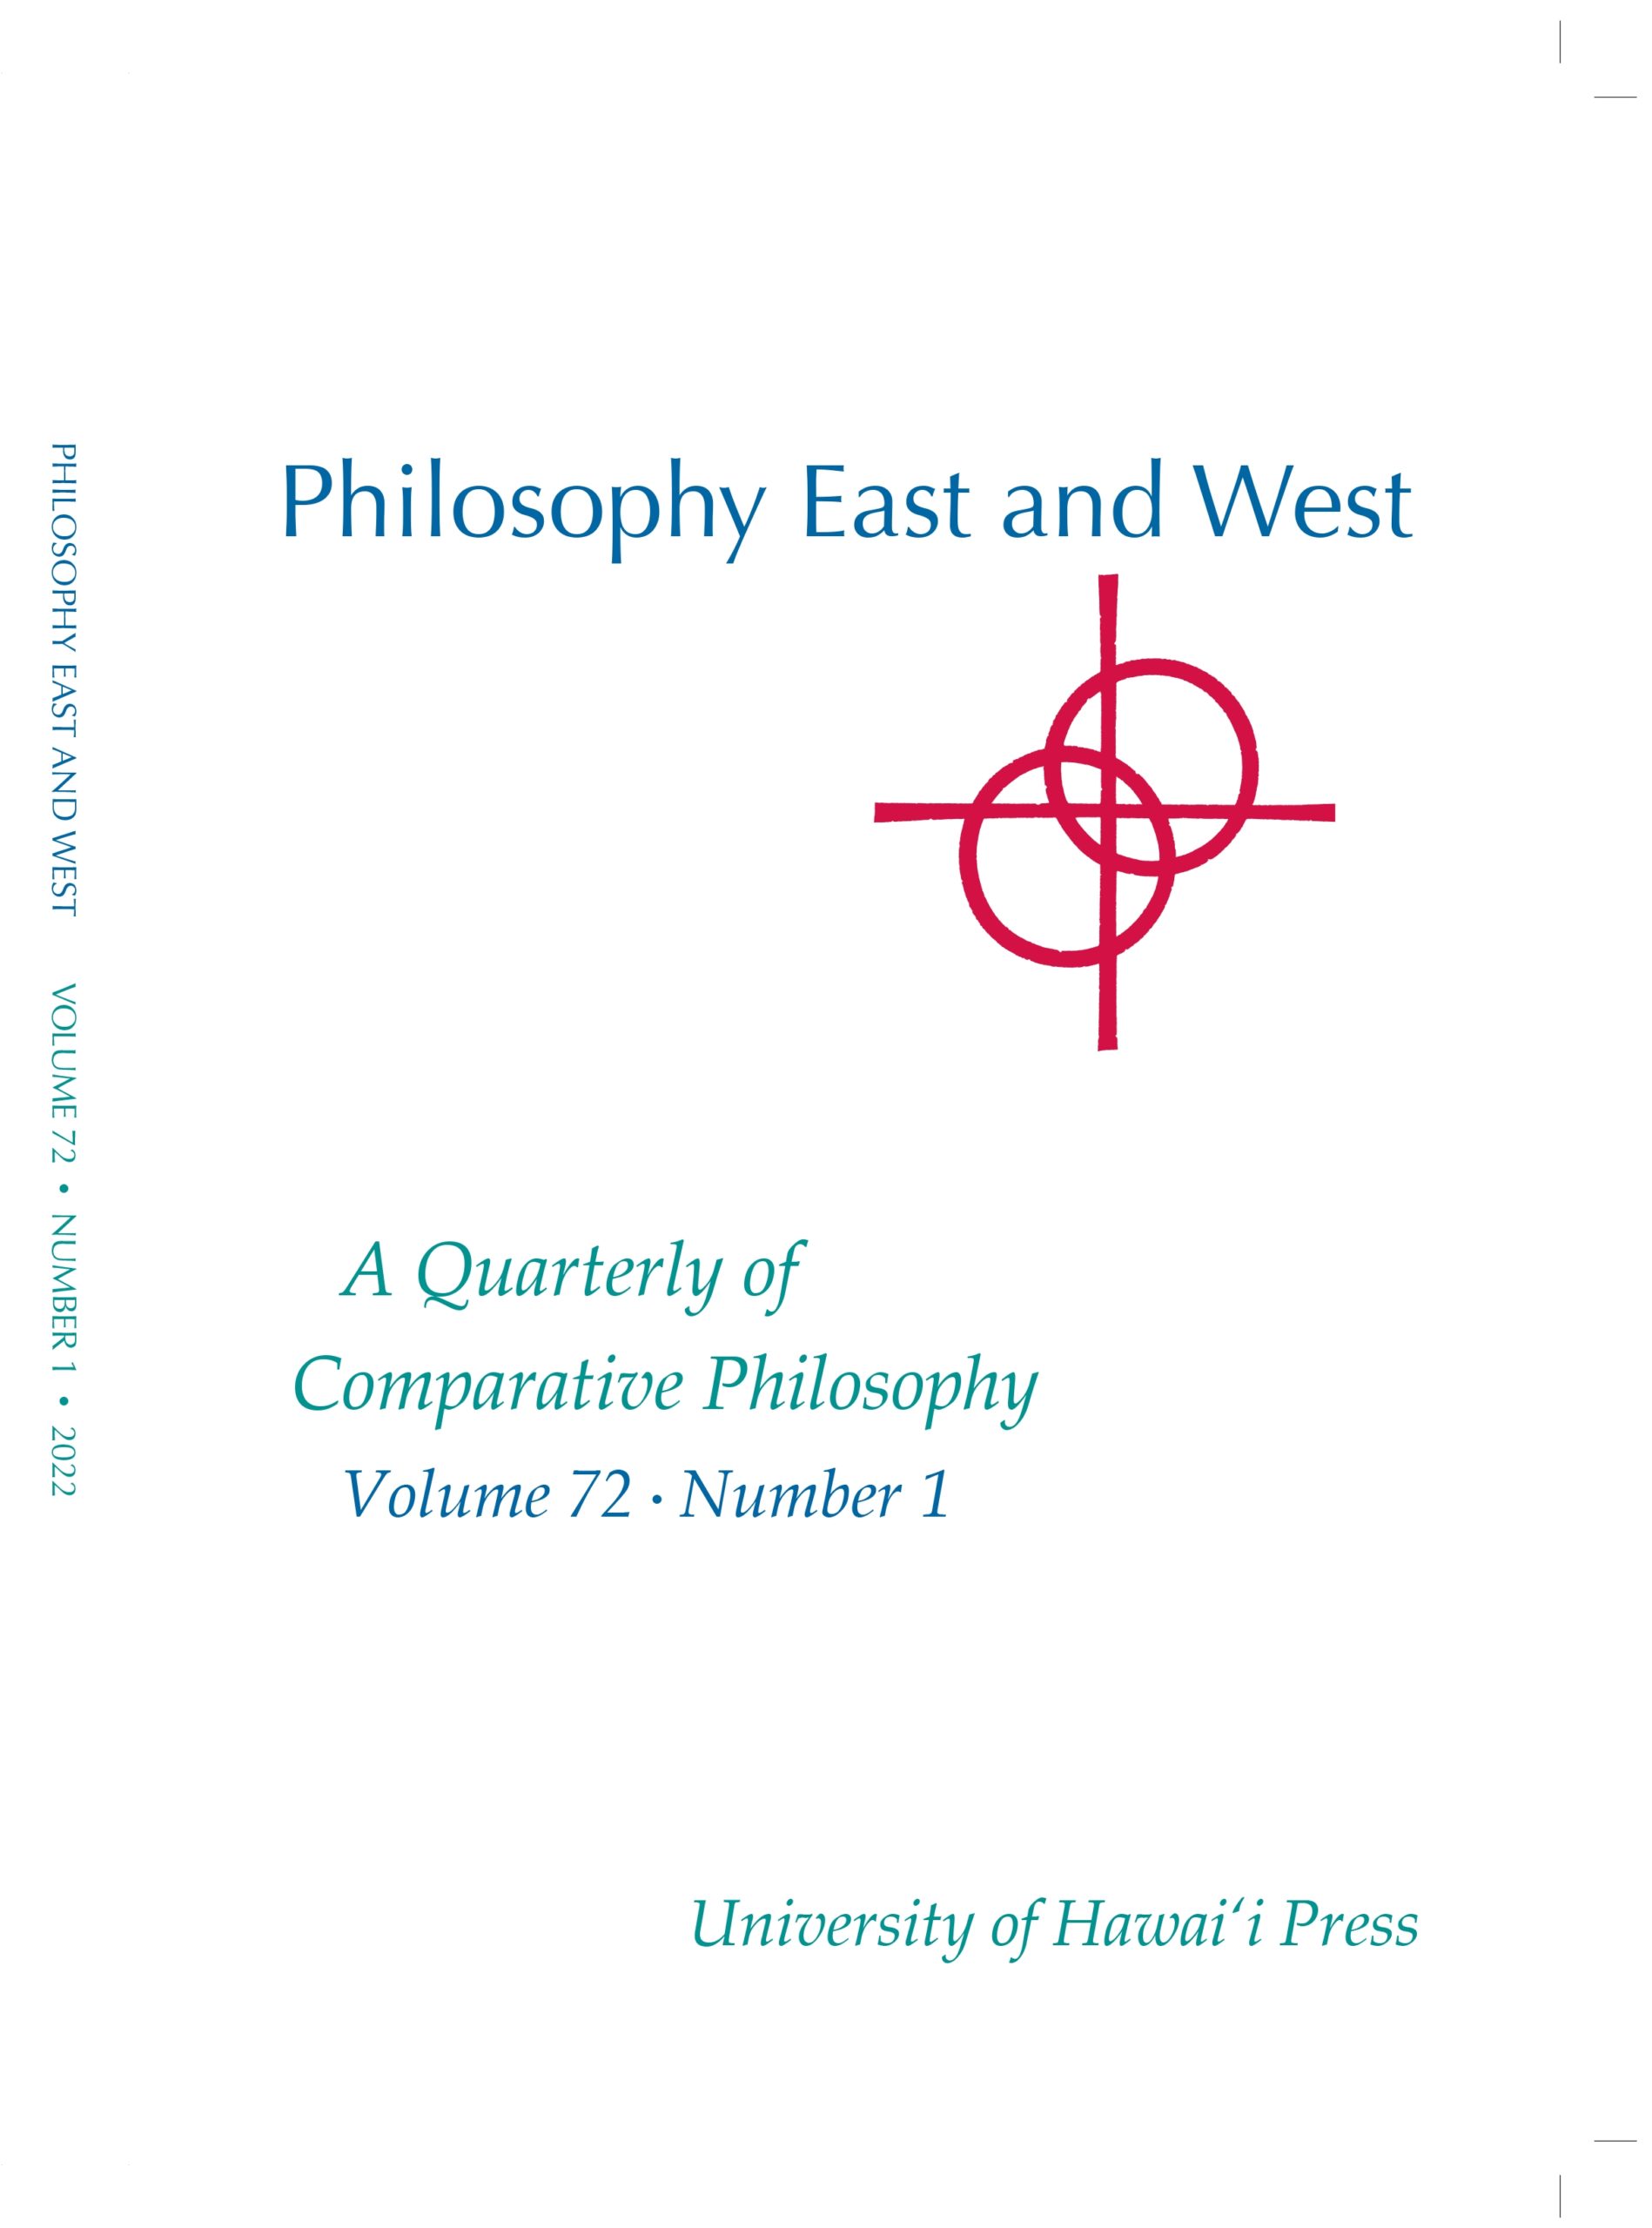 Philosophy East and West: A Quarterly of Comparative Philosophy